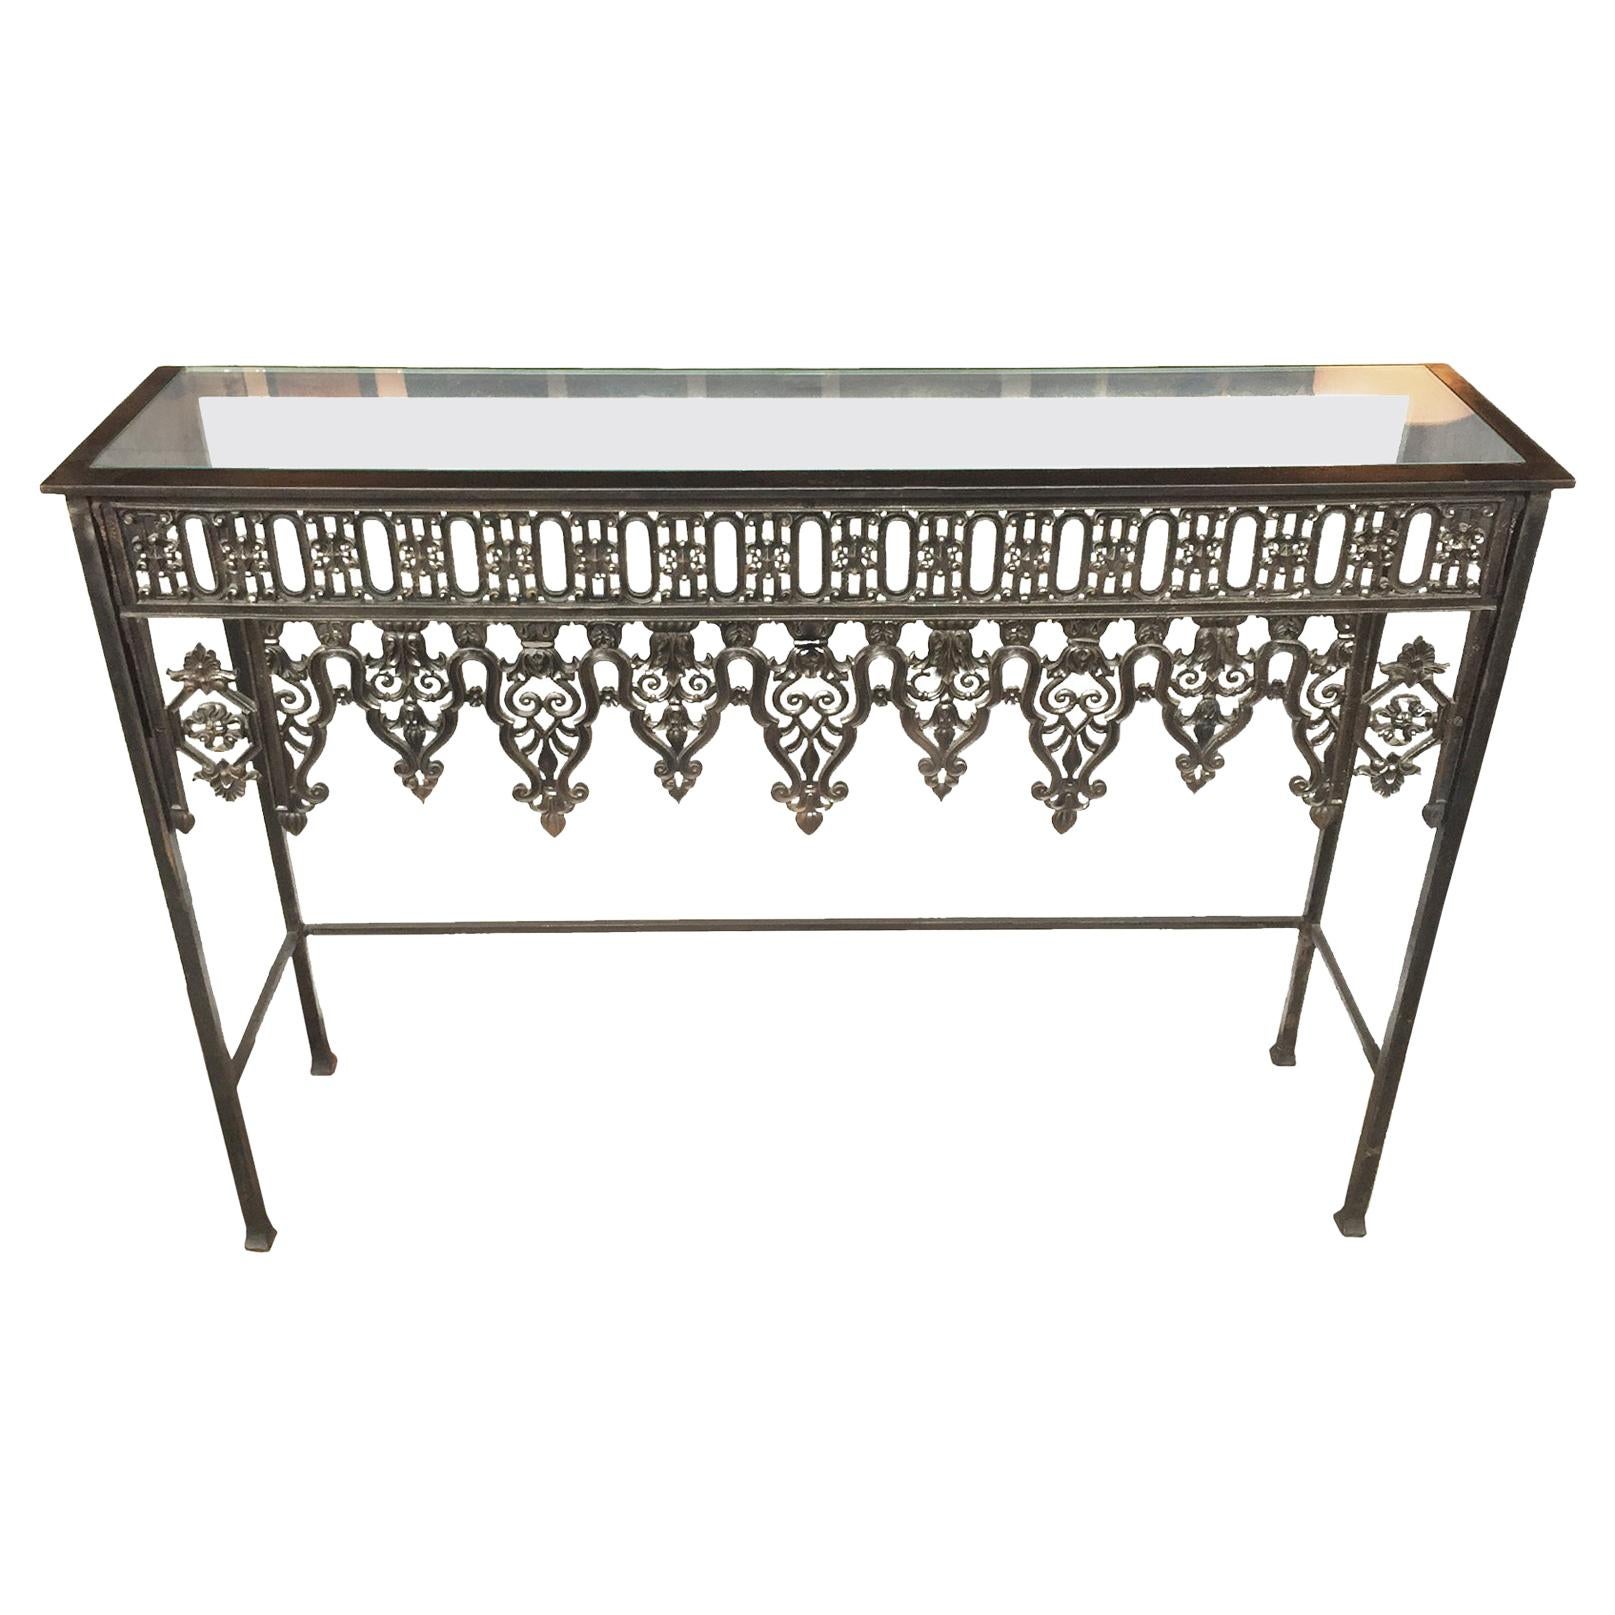 20th Century Custom Steel and Glass Console Table